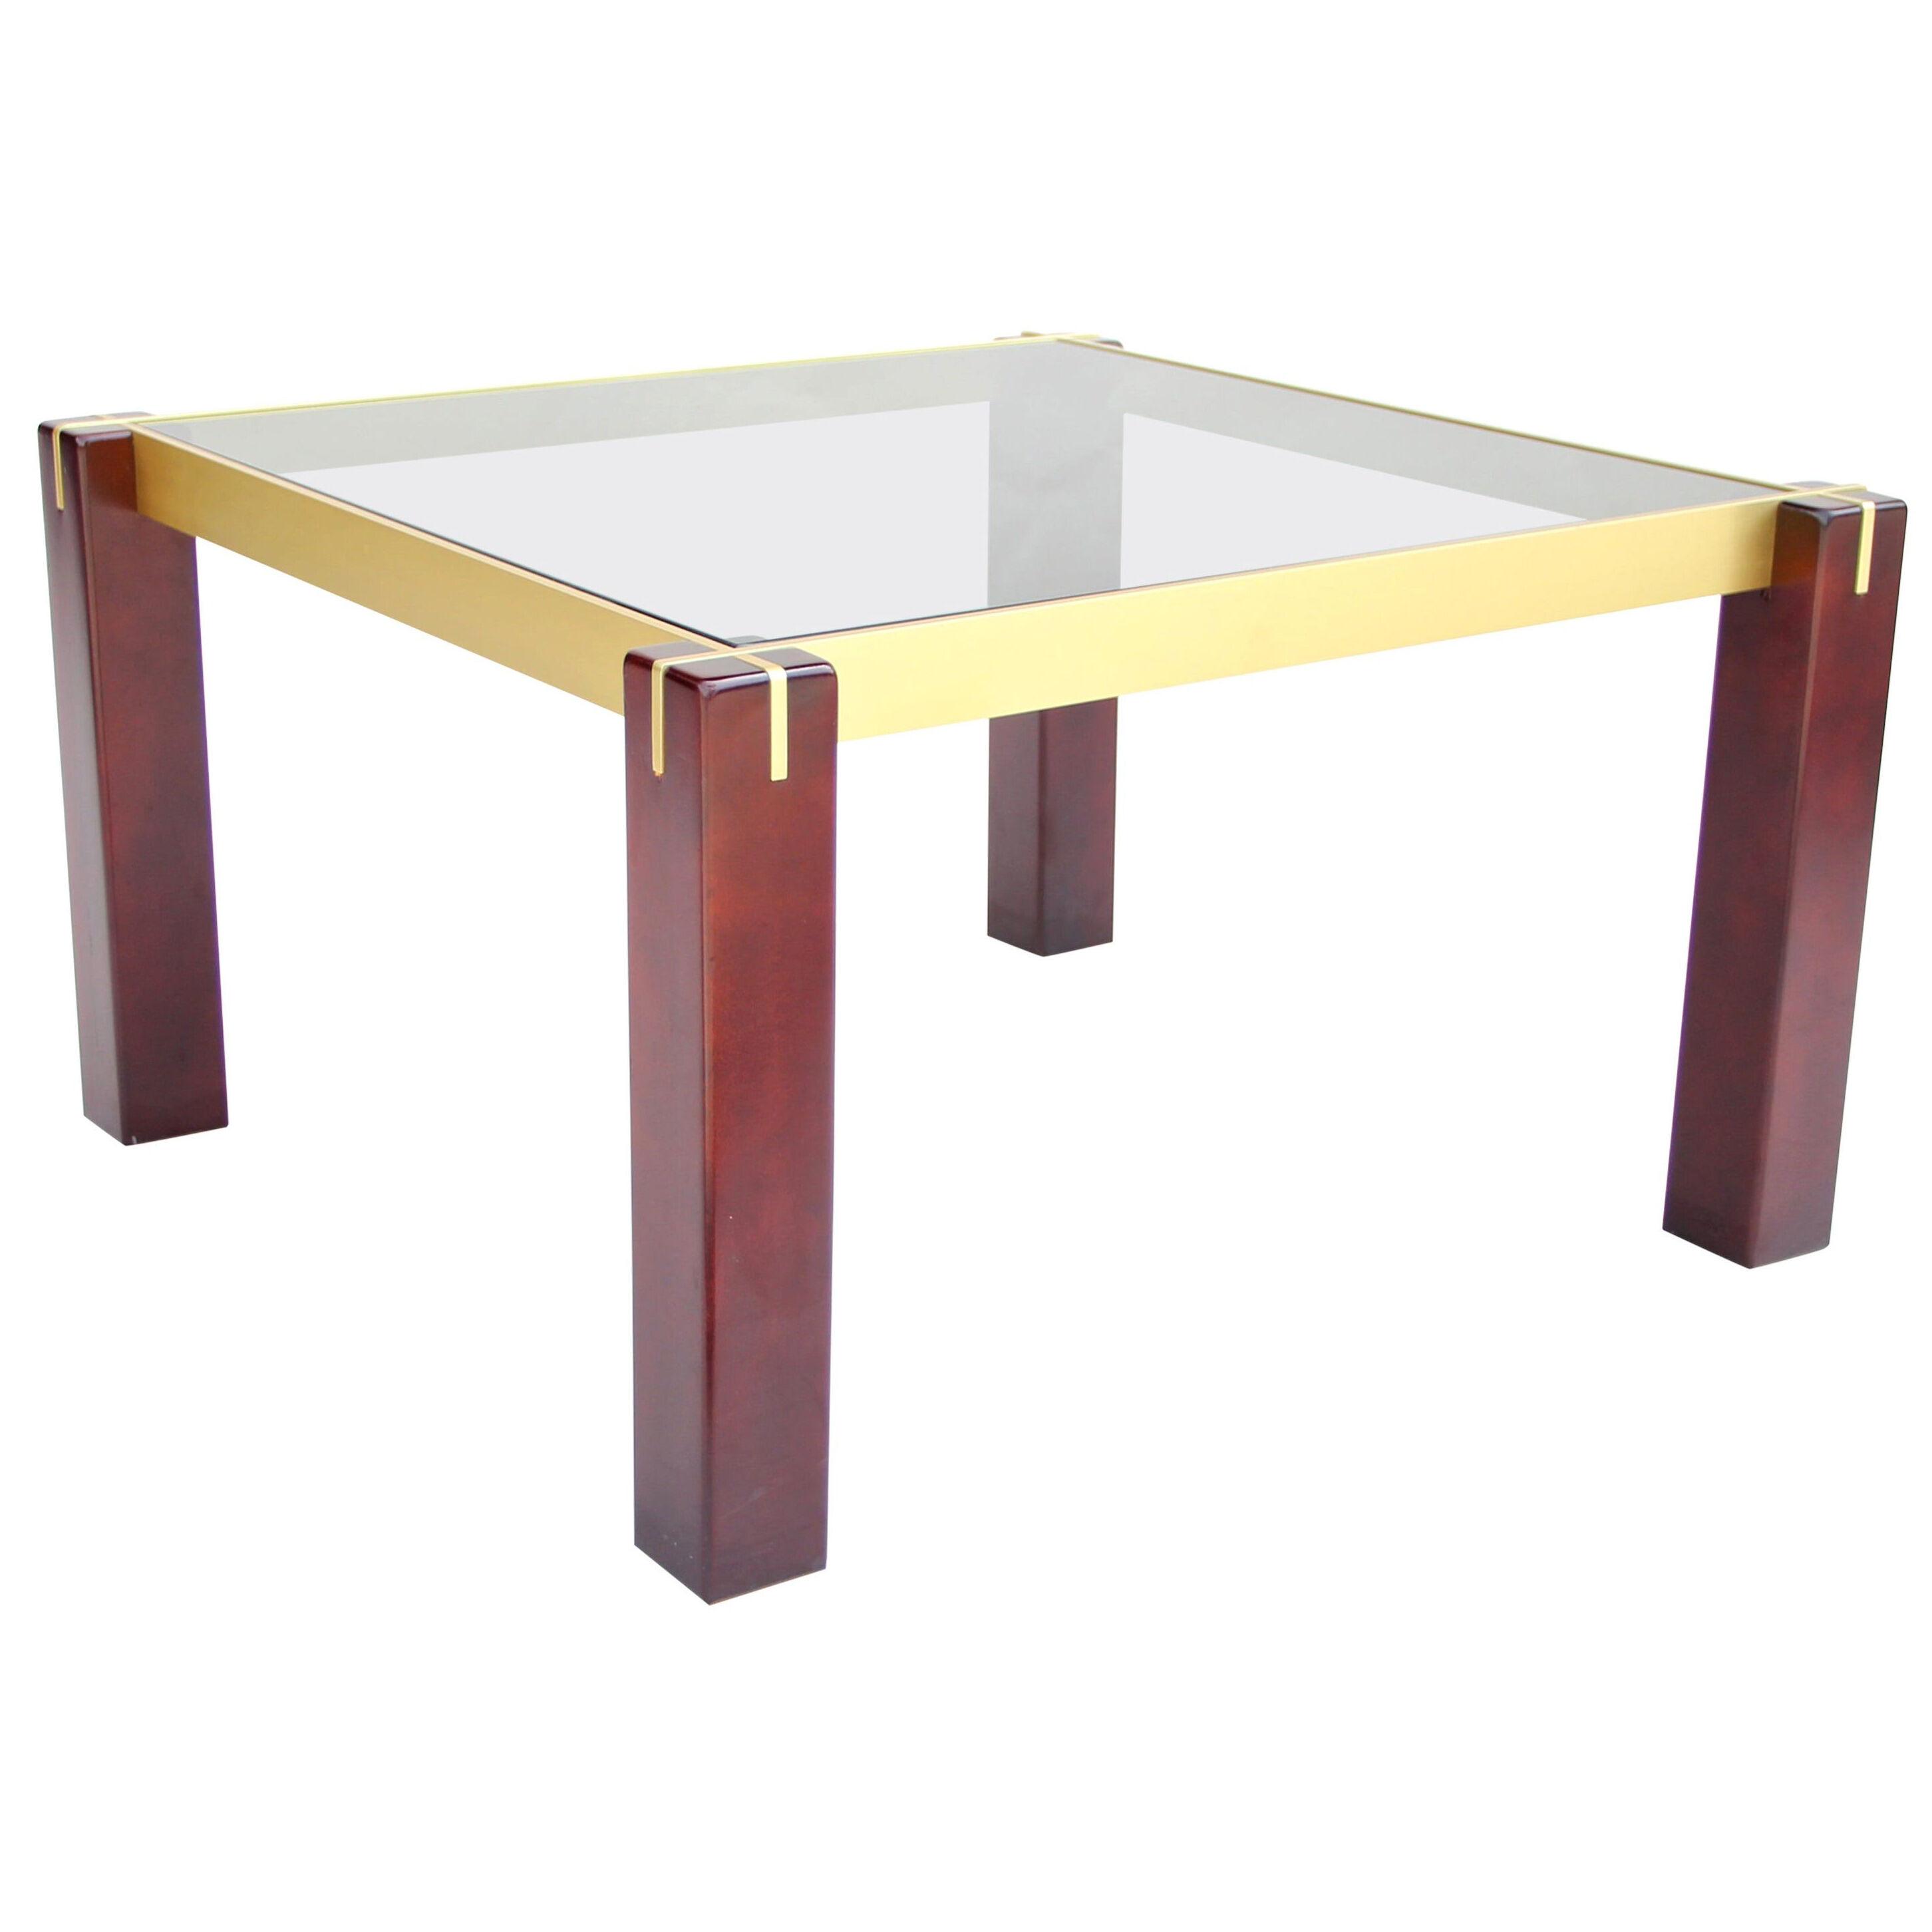 Midcentury Side Table with Brass Bars and Smoked Glass, Italy, circa 1960